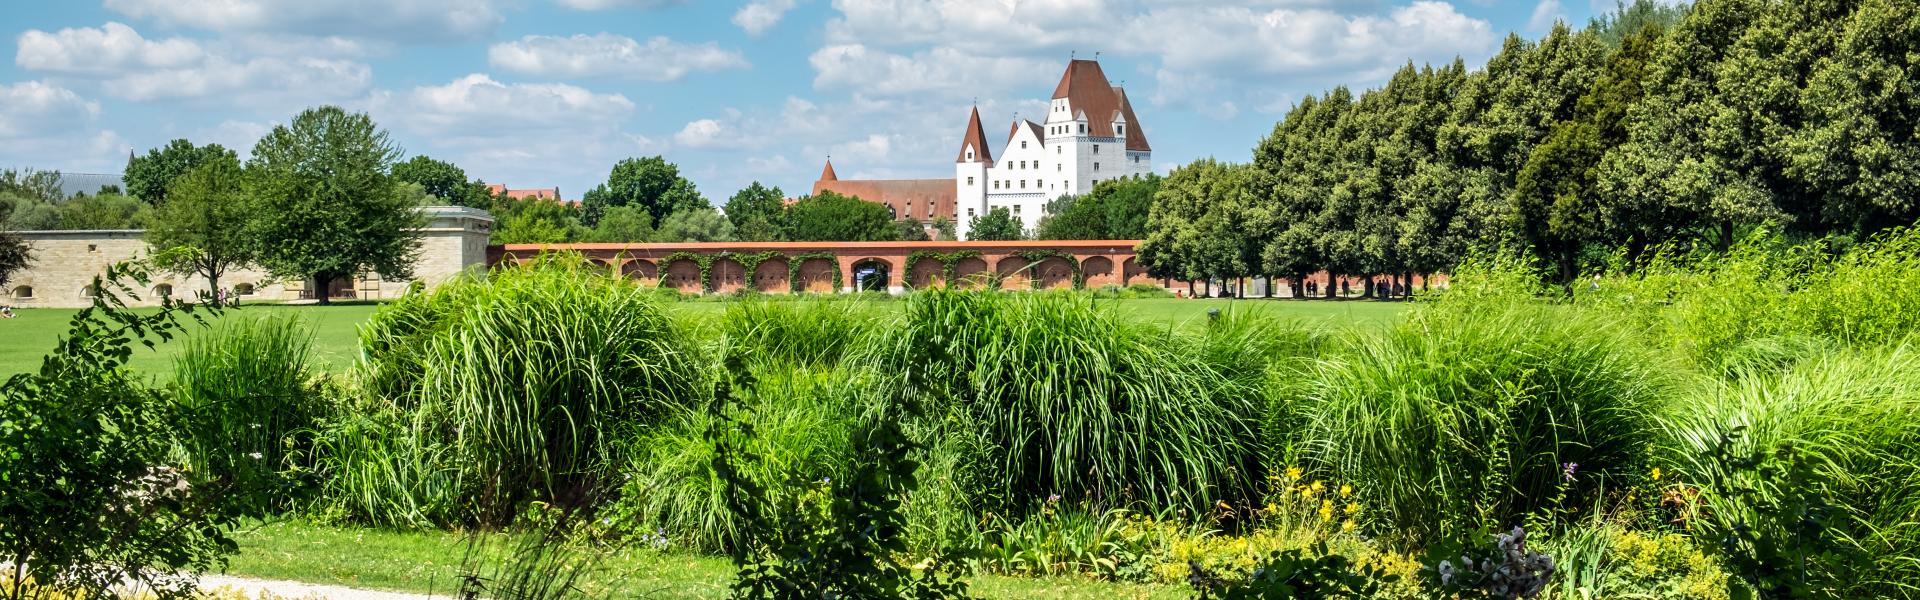 Find the perfect vacation home Ingolstadt - Casamundo